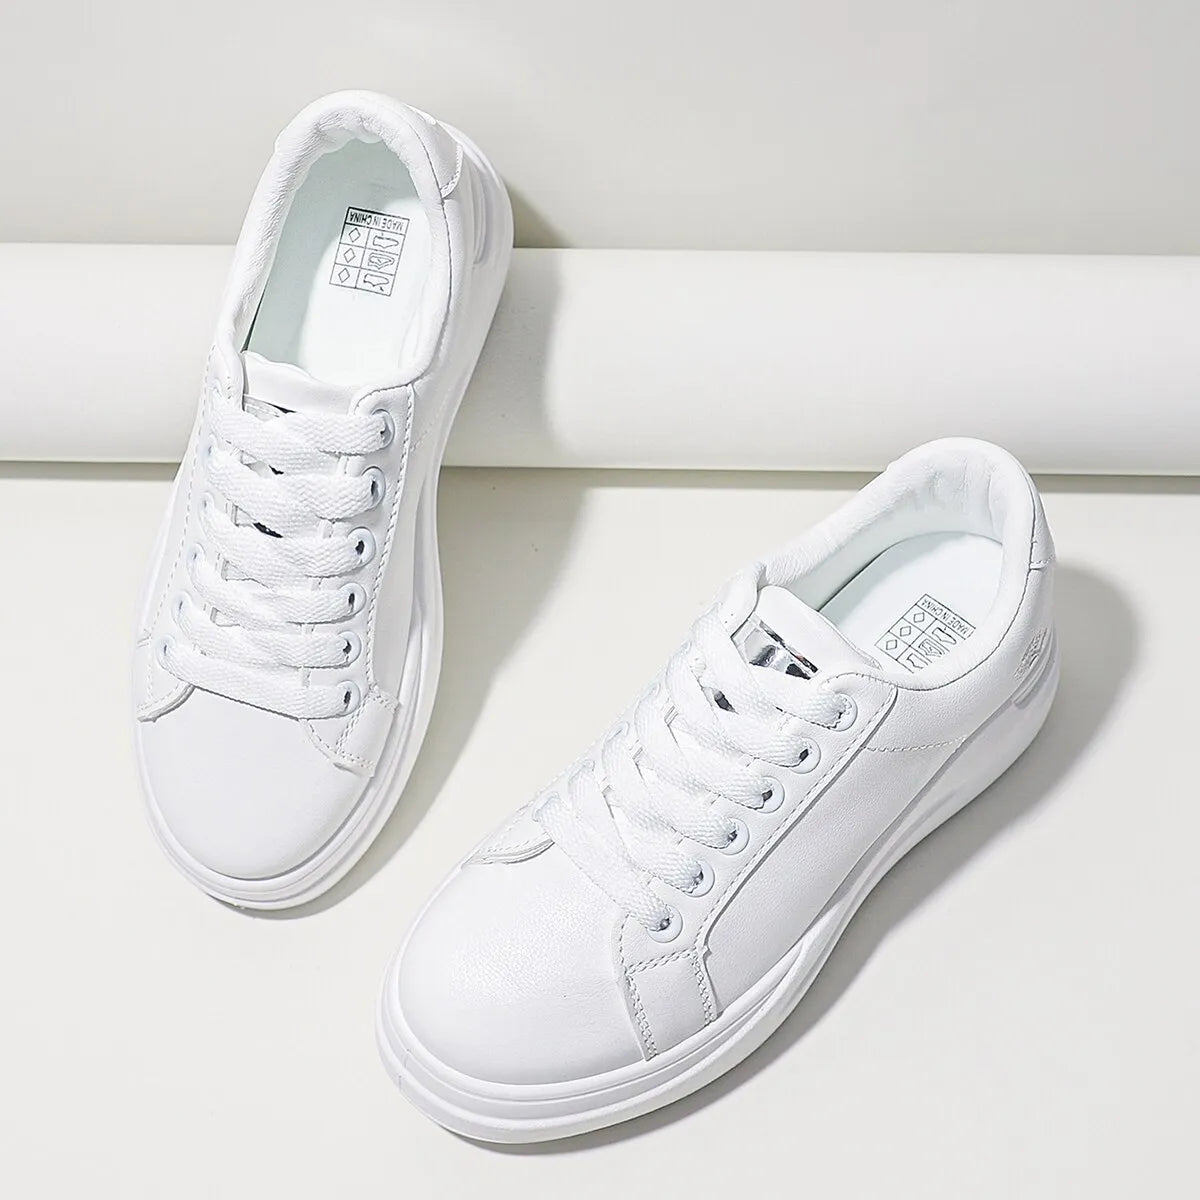 Women's Stylish Lace-Up Skate White Floral Embroidered Sneakers